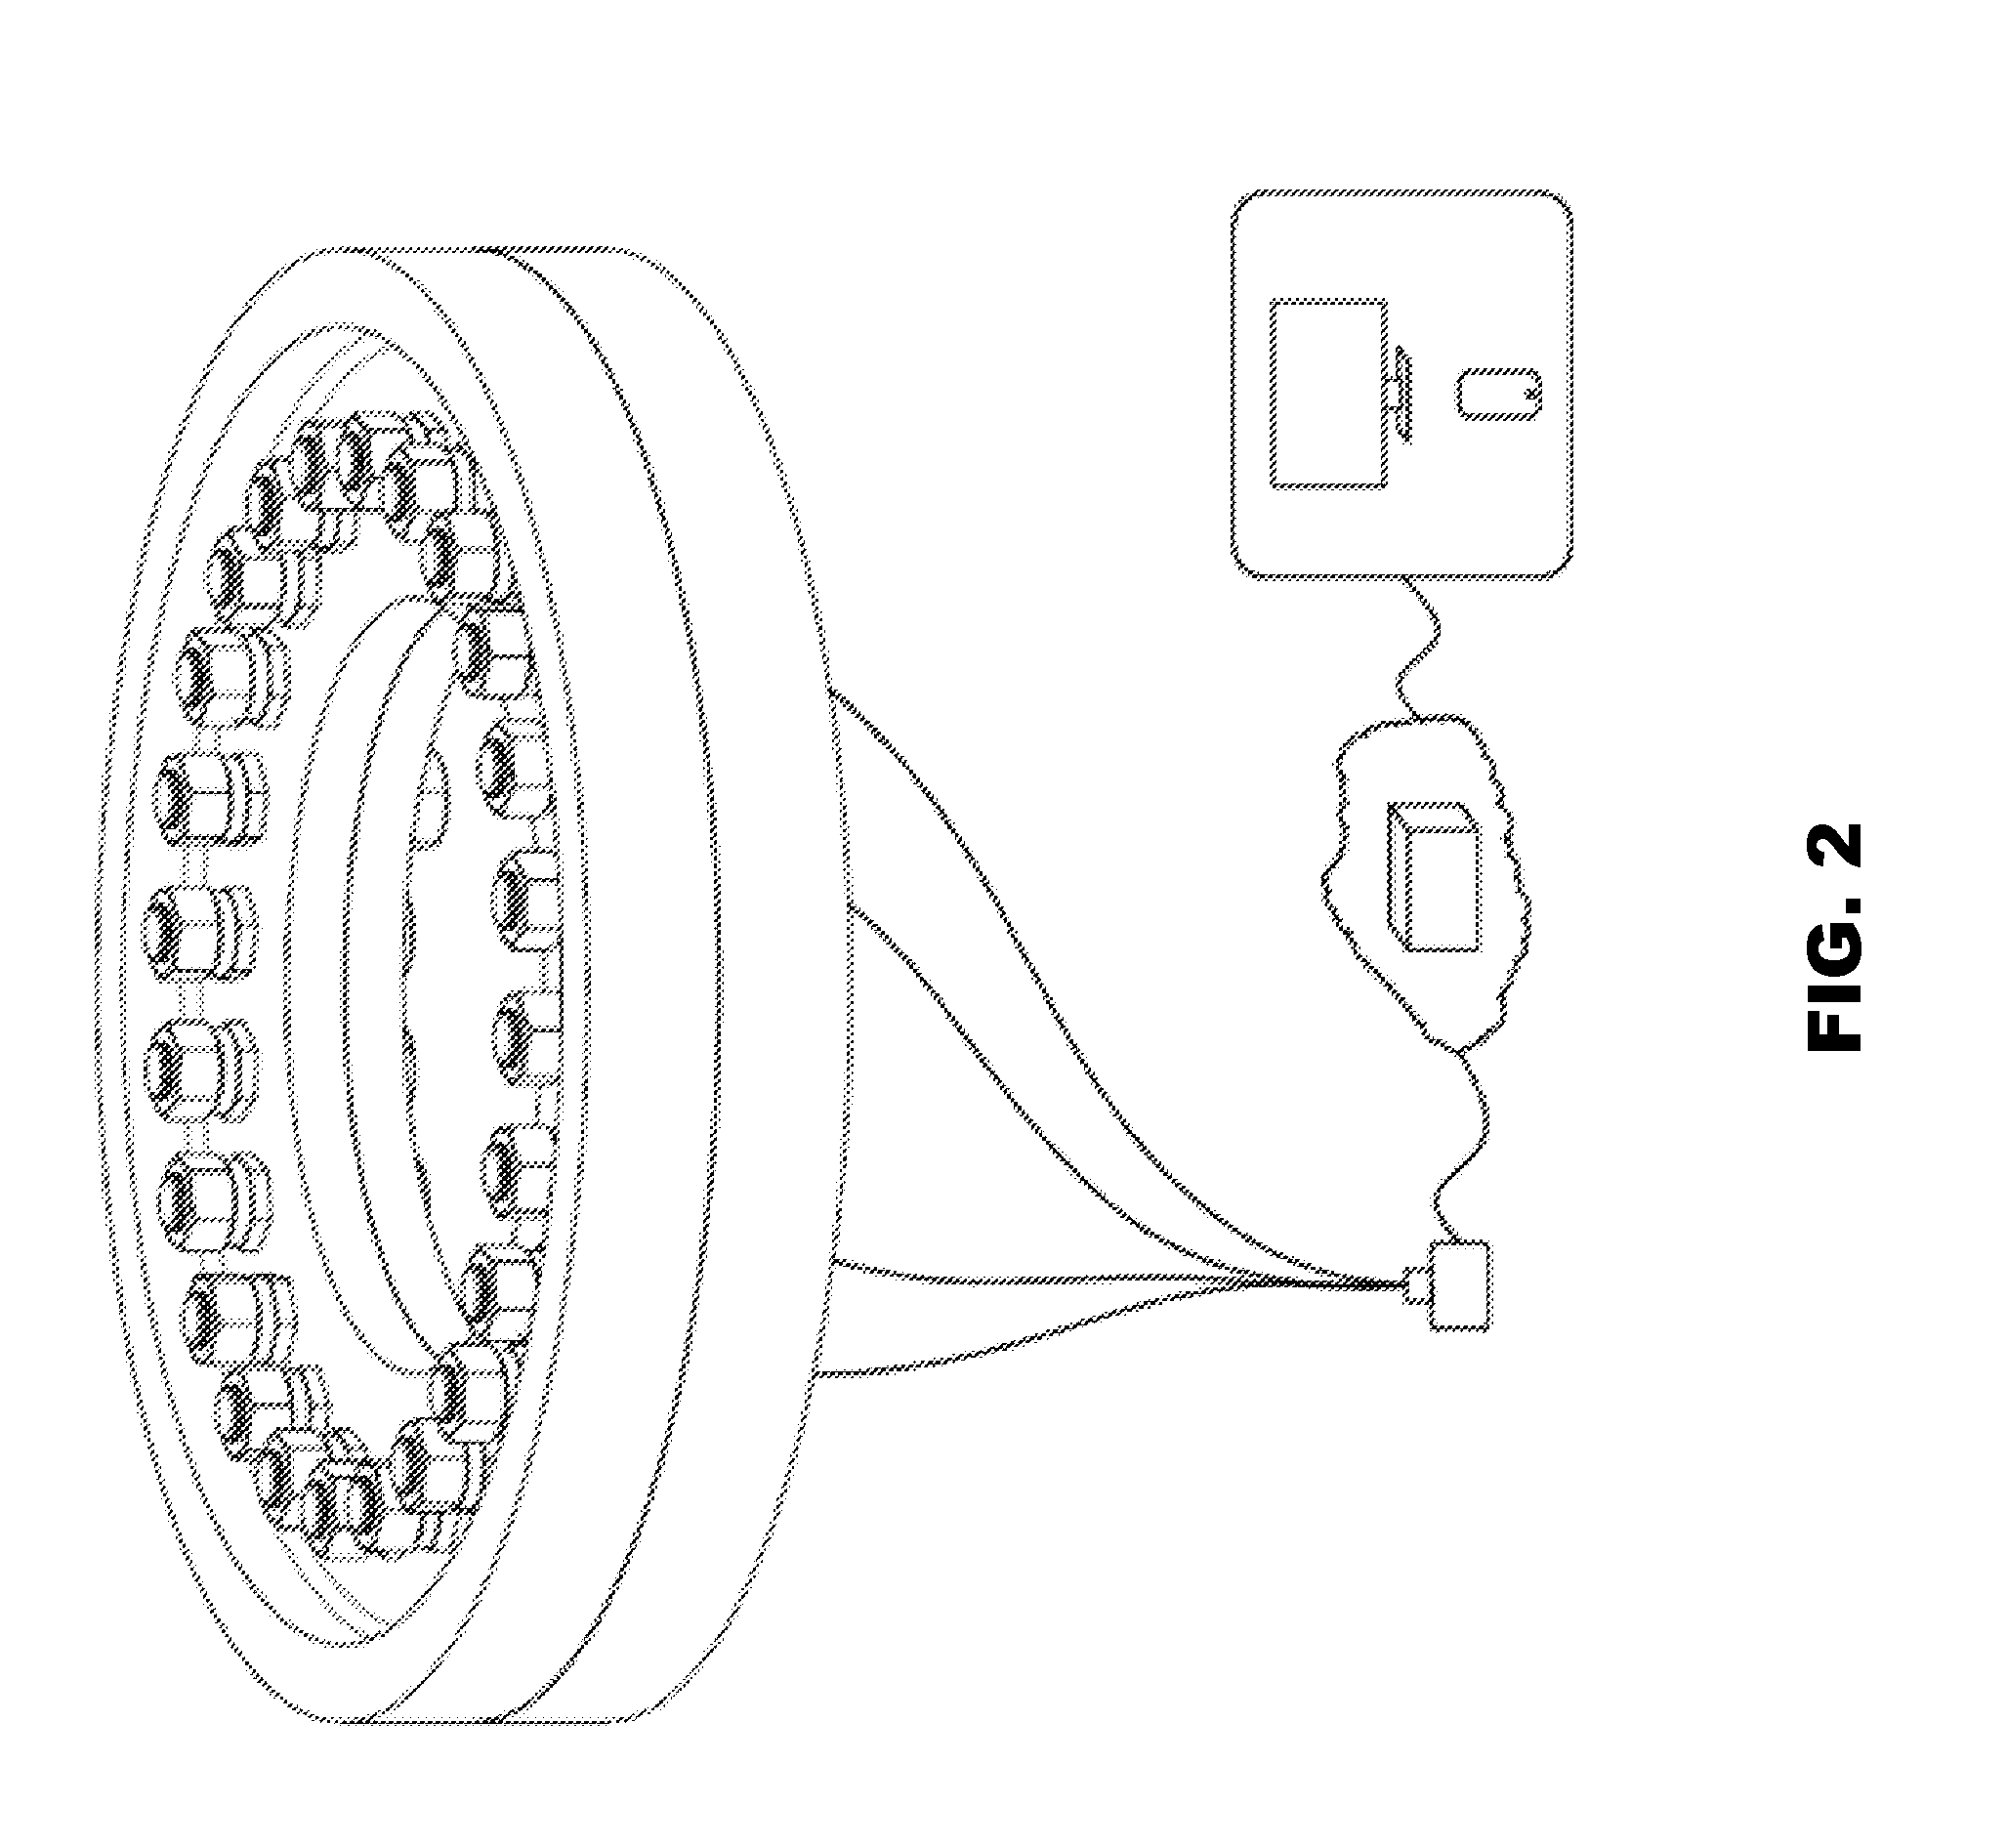 System for reducing maintenance frequency for bolts and nuts of wind turbine